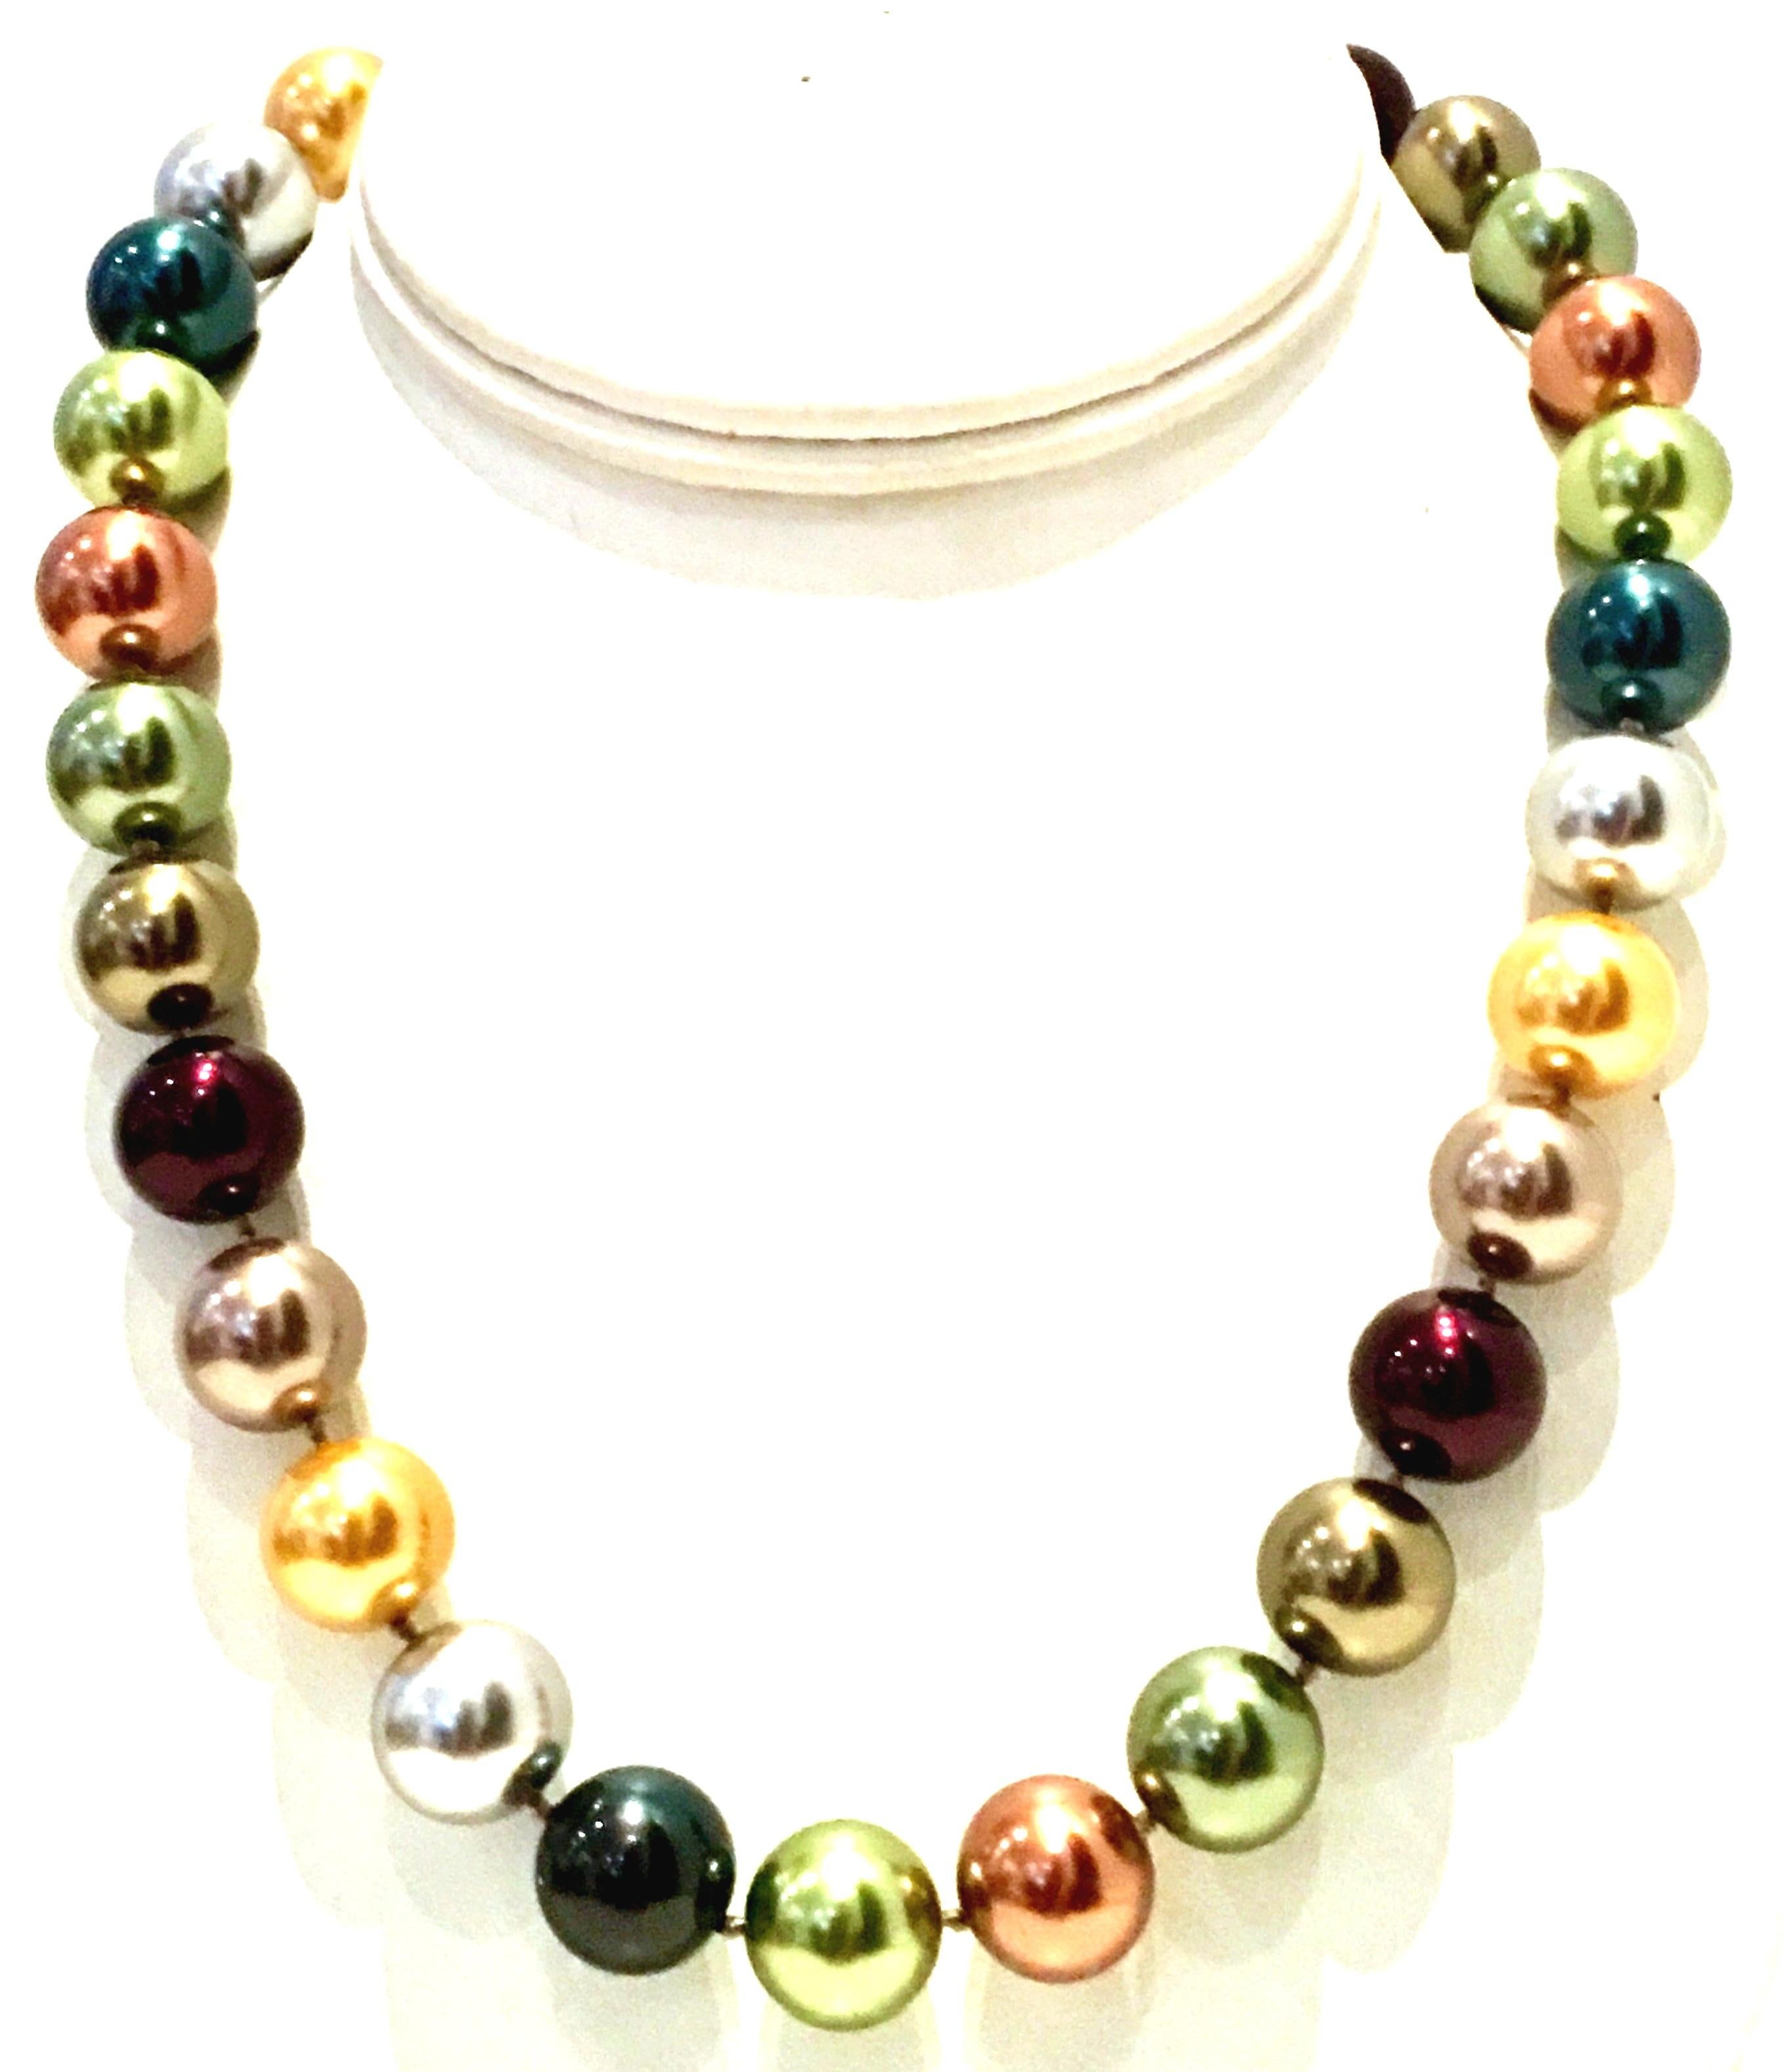 2009  Faux Pearl Bead Multi Color Choker Style Necklace By, Kenneth Jay Lane. Features multi colored faux pearls in metallic, gold, rose gold, silver, black, green and amethyst with gold plate detail. Signed KJL on hang tag adjustable clasp. Each